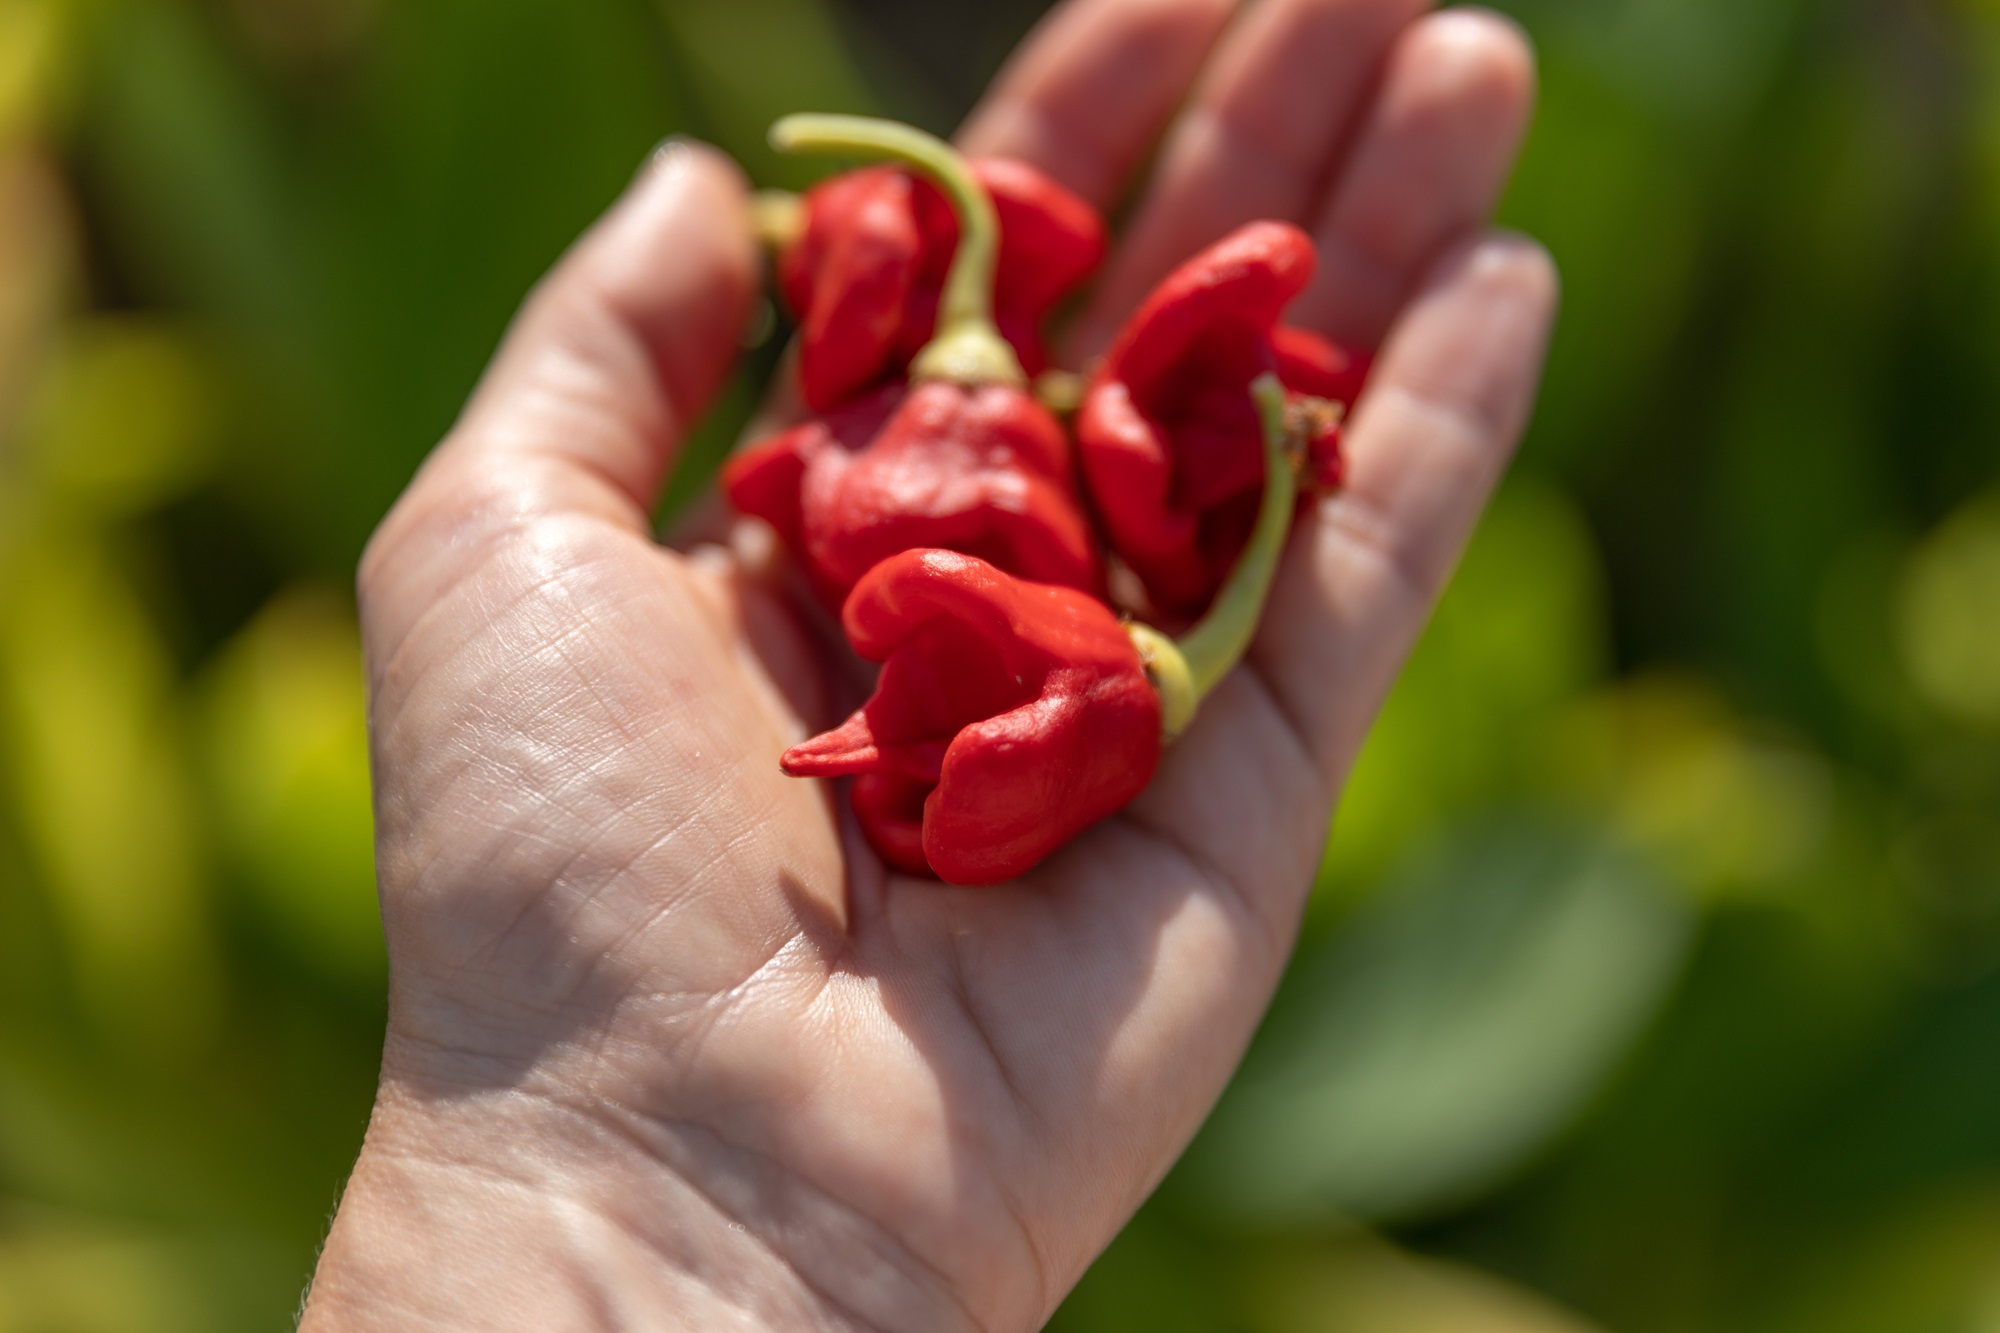 Enrich Robe risiko The psychology behind liking spicy food and pain | Popular Science